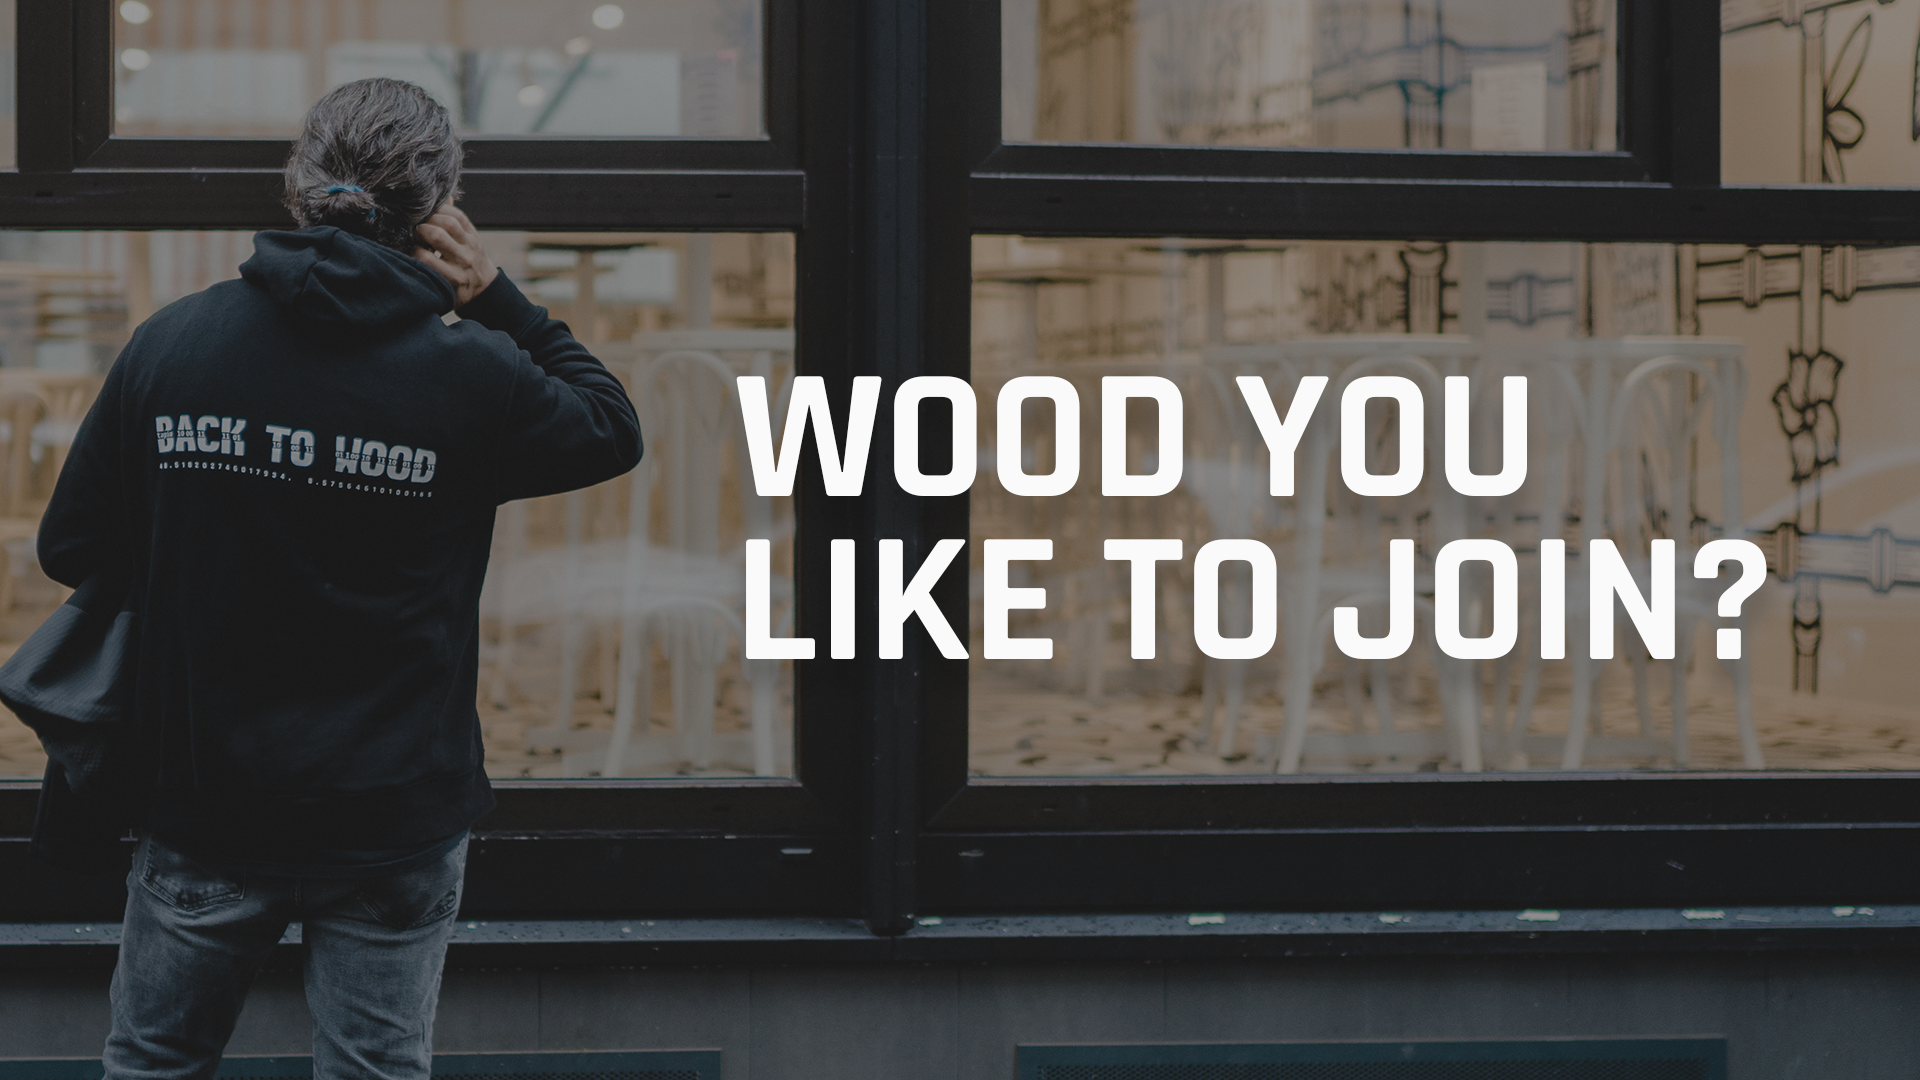 wood-you-like-to-join-we-are-hiring-new-positions-software-business-leadd-front-end-back-end-cloud-based-application-tapio-back-to-wood-jobs